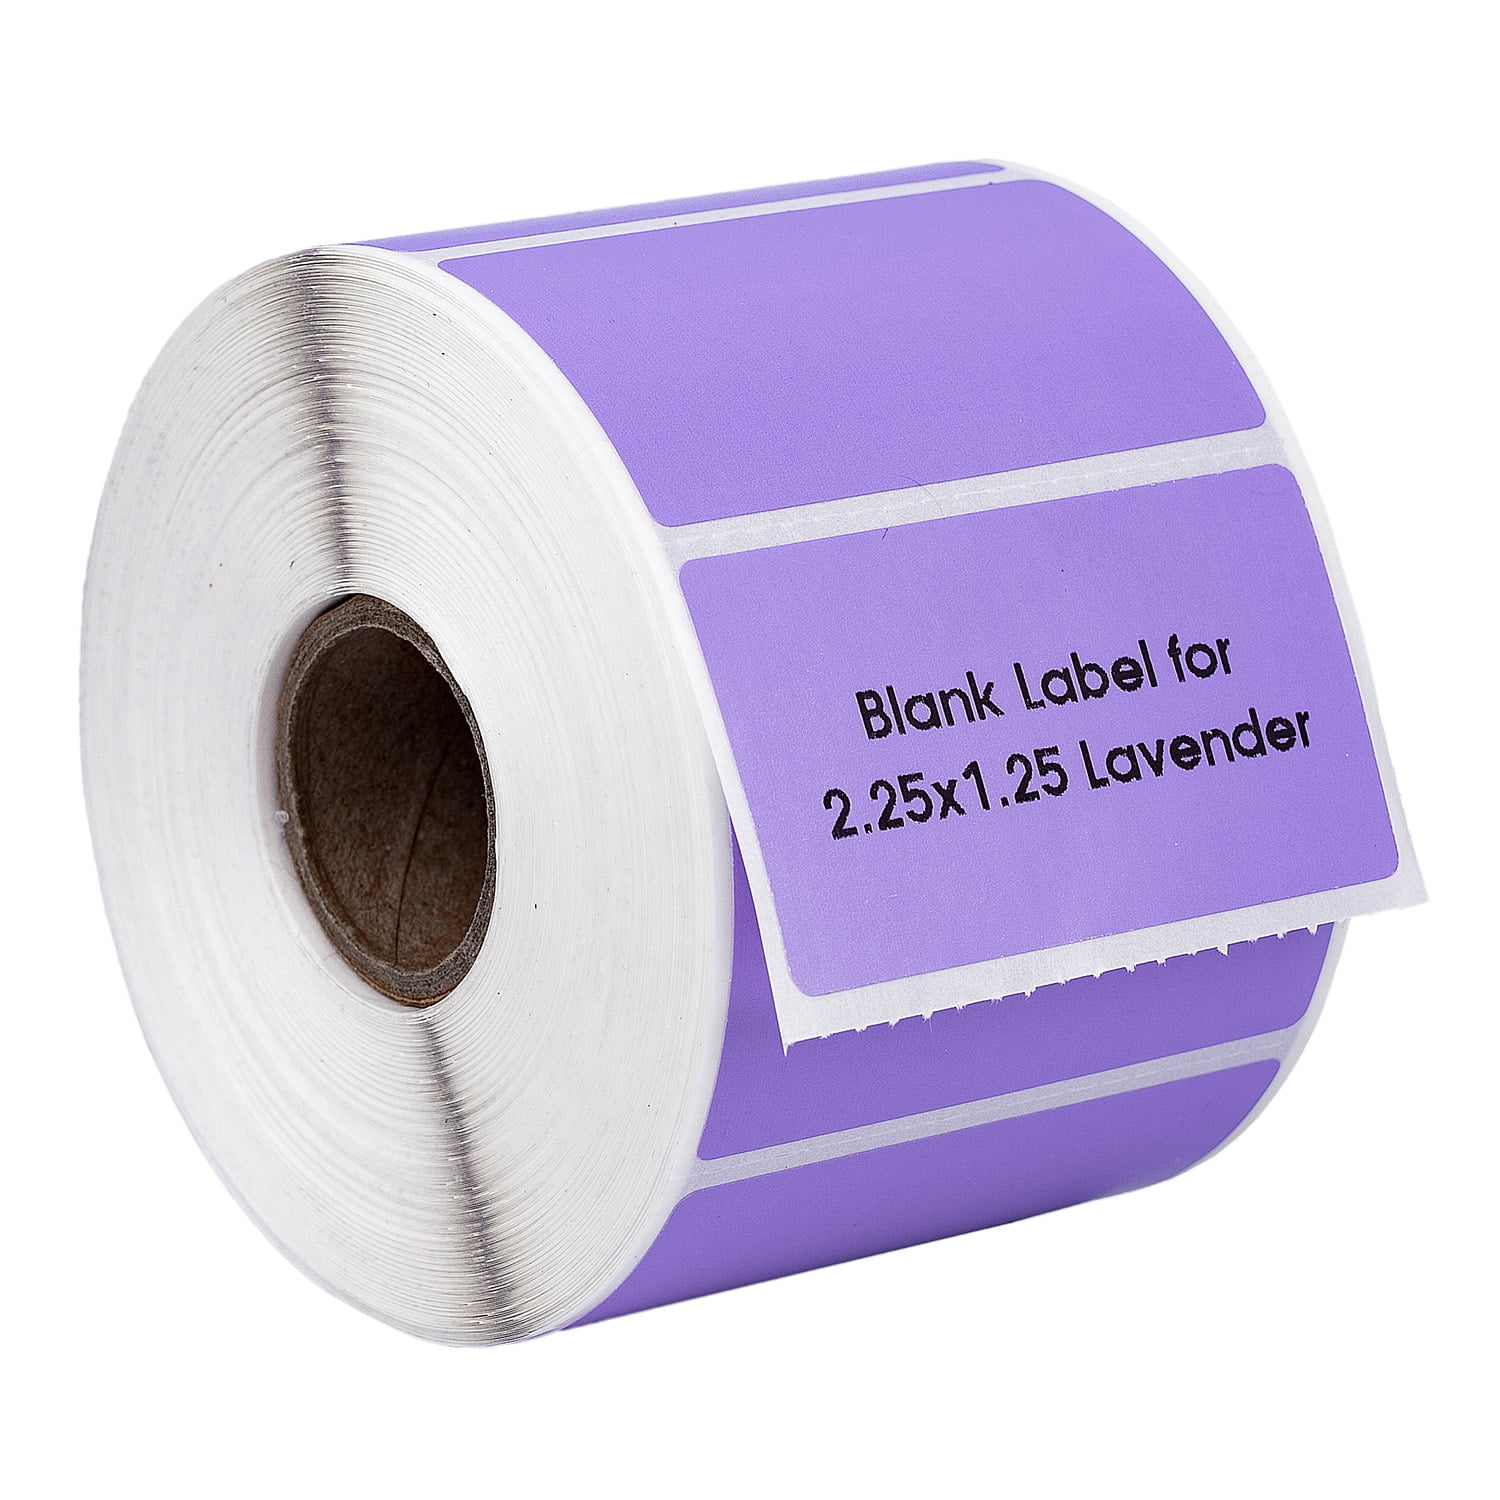 8 Rolls 2.25"x1.25" Direct Thermal Barcode Label for Zebra LP2824 TLP2824 LP2844 